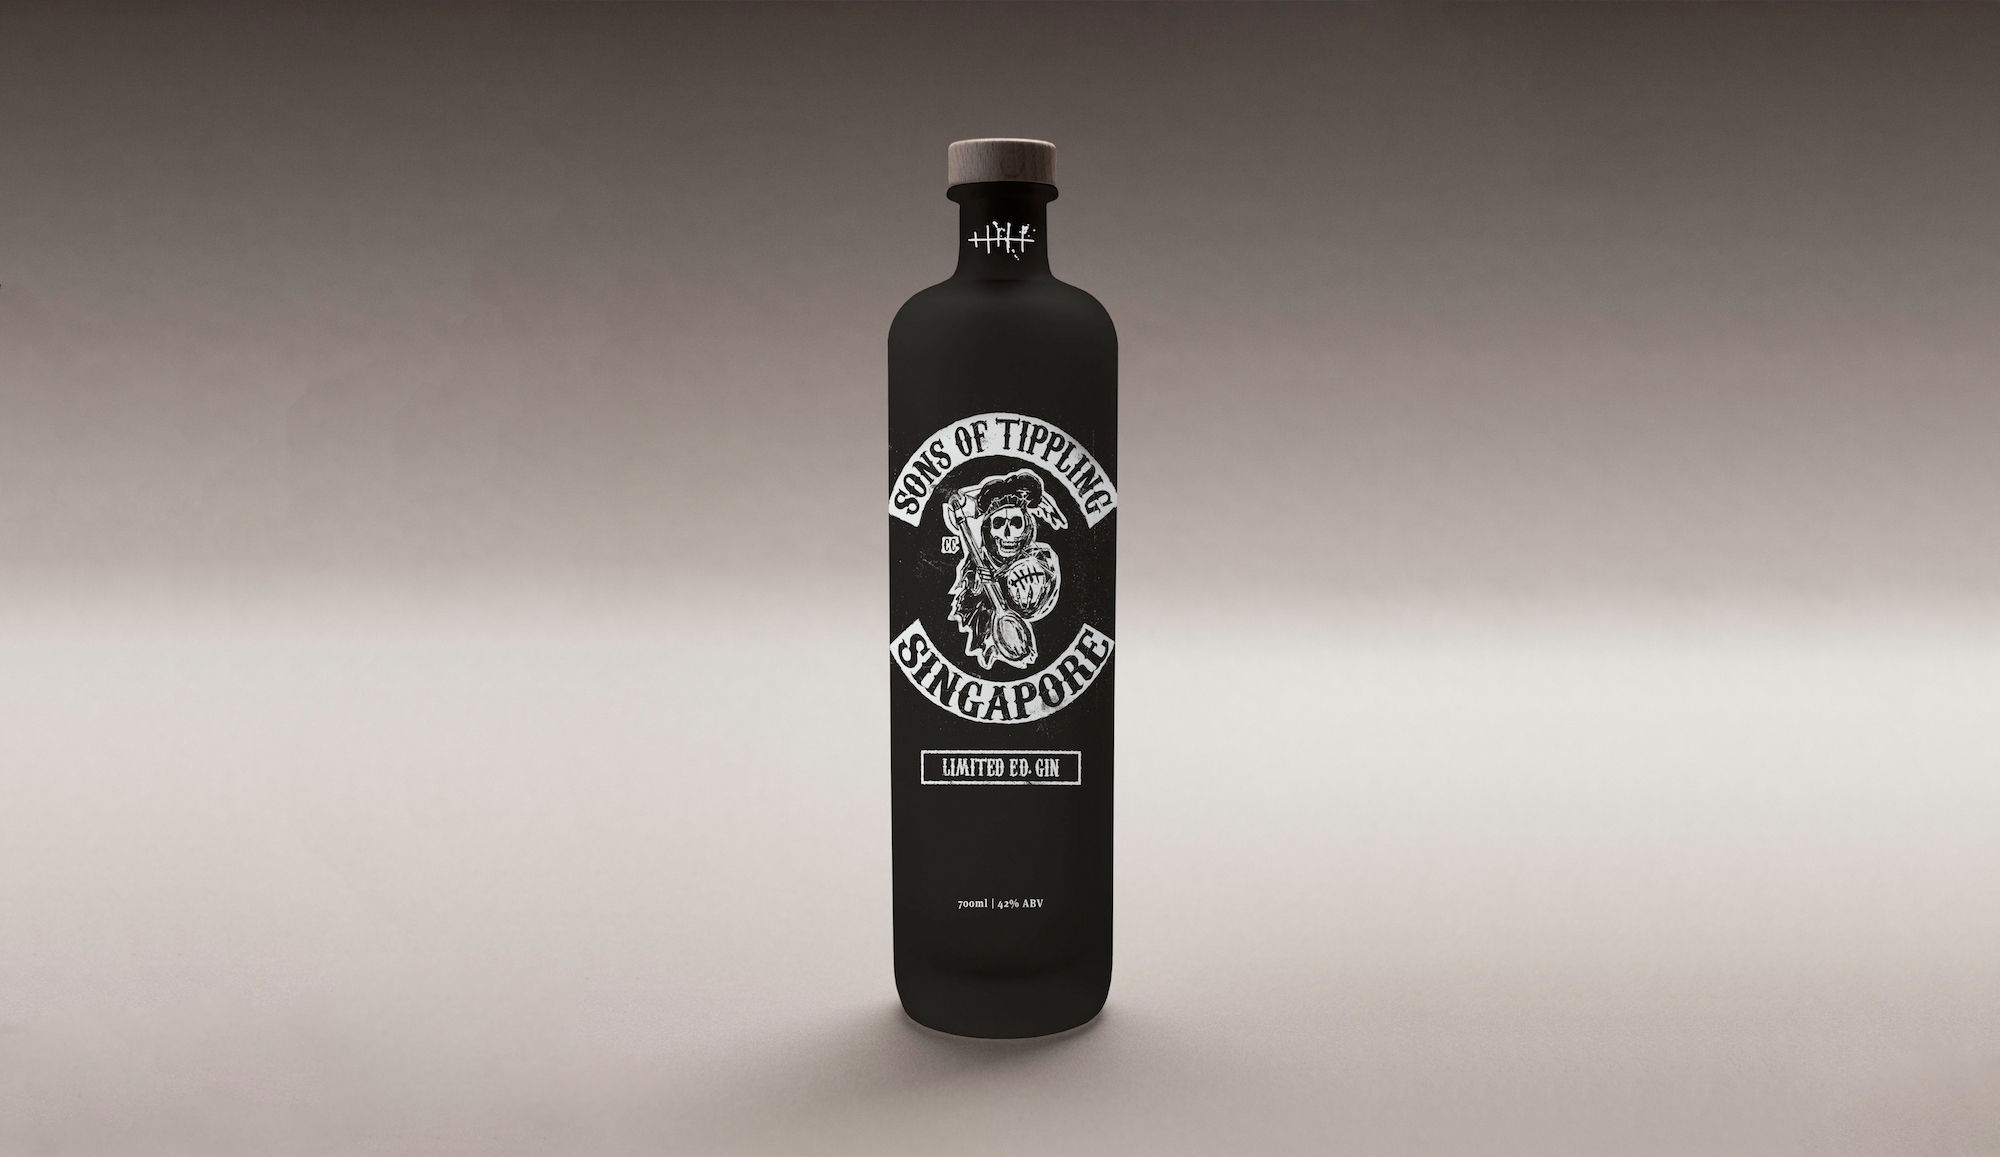 Tippling Club launches its own limited edition gin, Sons of Tippling